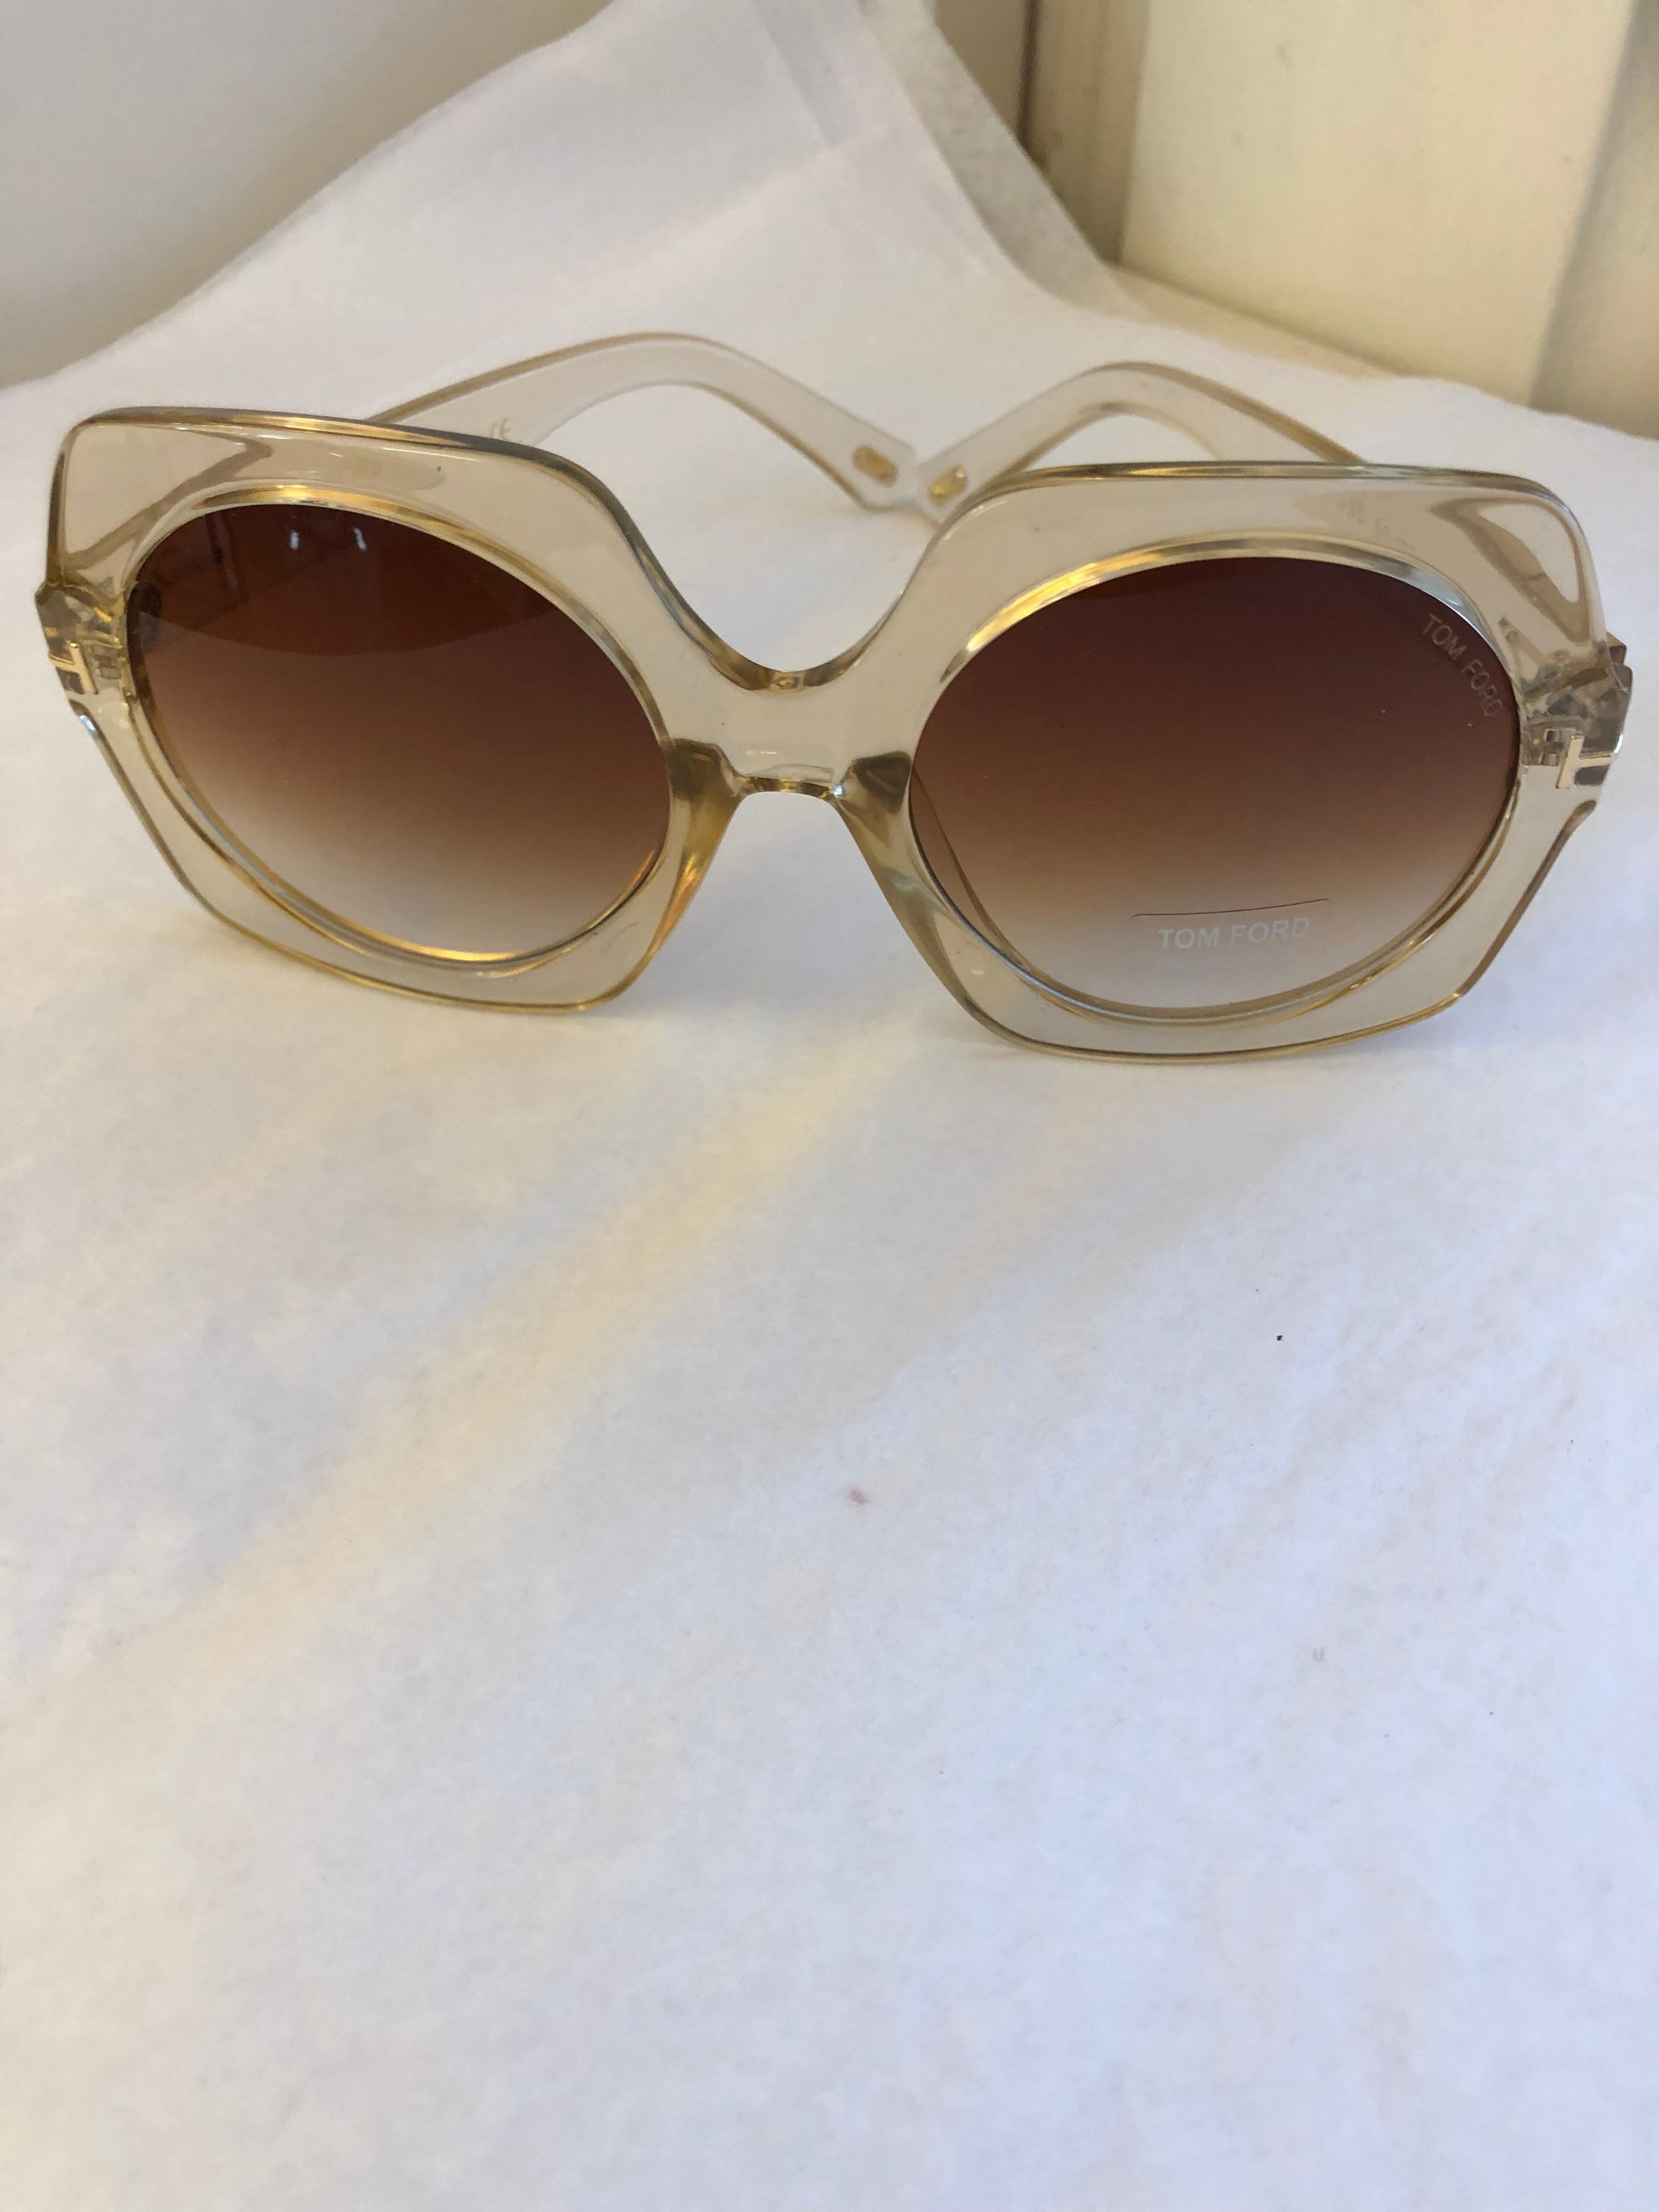 Tom Ford Sofia Sunglasses FT 0535 in Pale Gold Tone Never Worn w/Case and Box 2